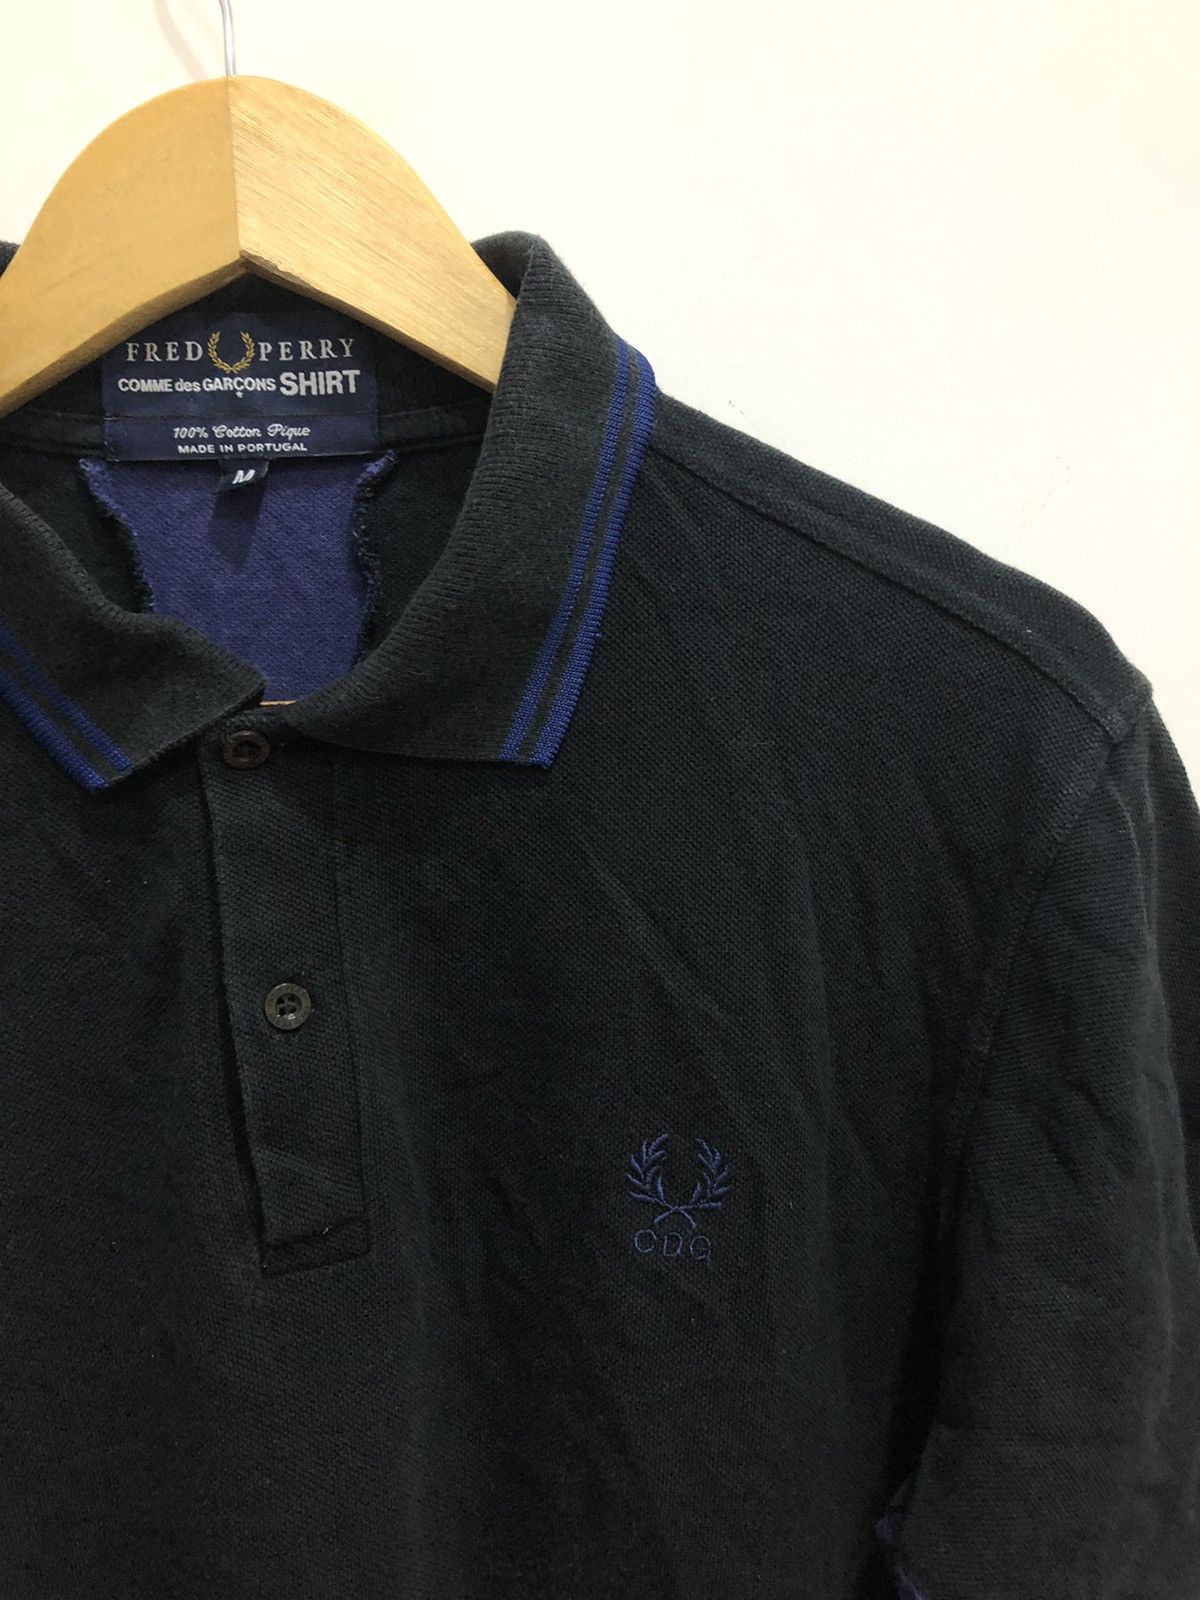 SS04 CDG x Fred Perry Polo Shirt - 7